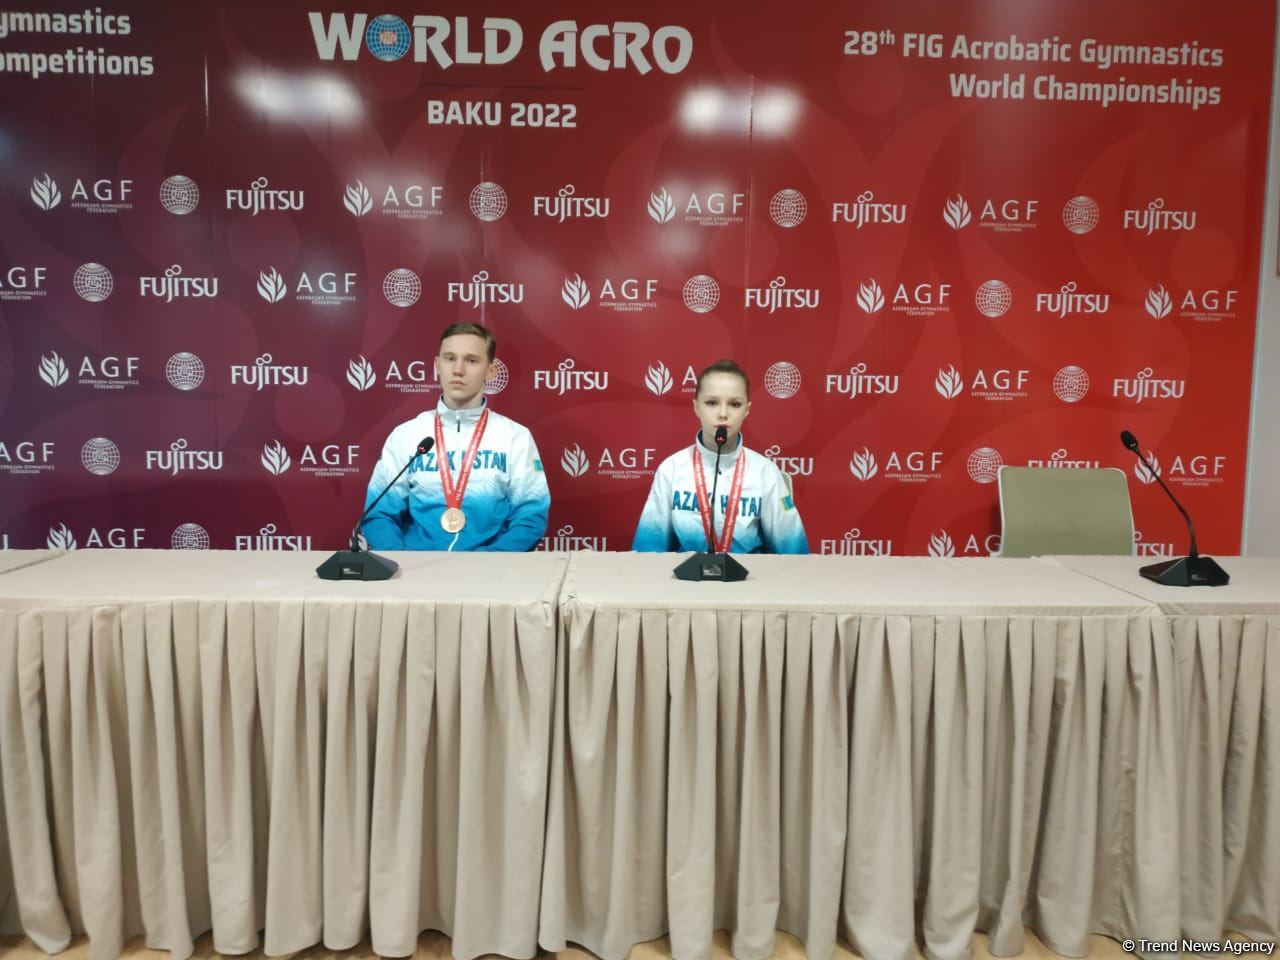 Kazakhstan’s athletes pleased with result of performance at 12th FIG Acrobatic Gymnastics World Age Group Competitions in Baku